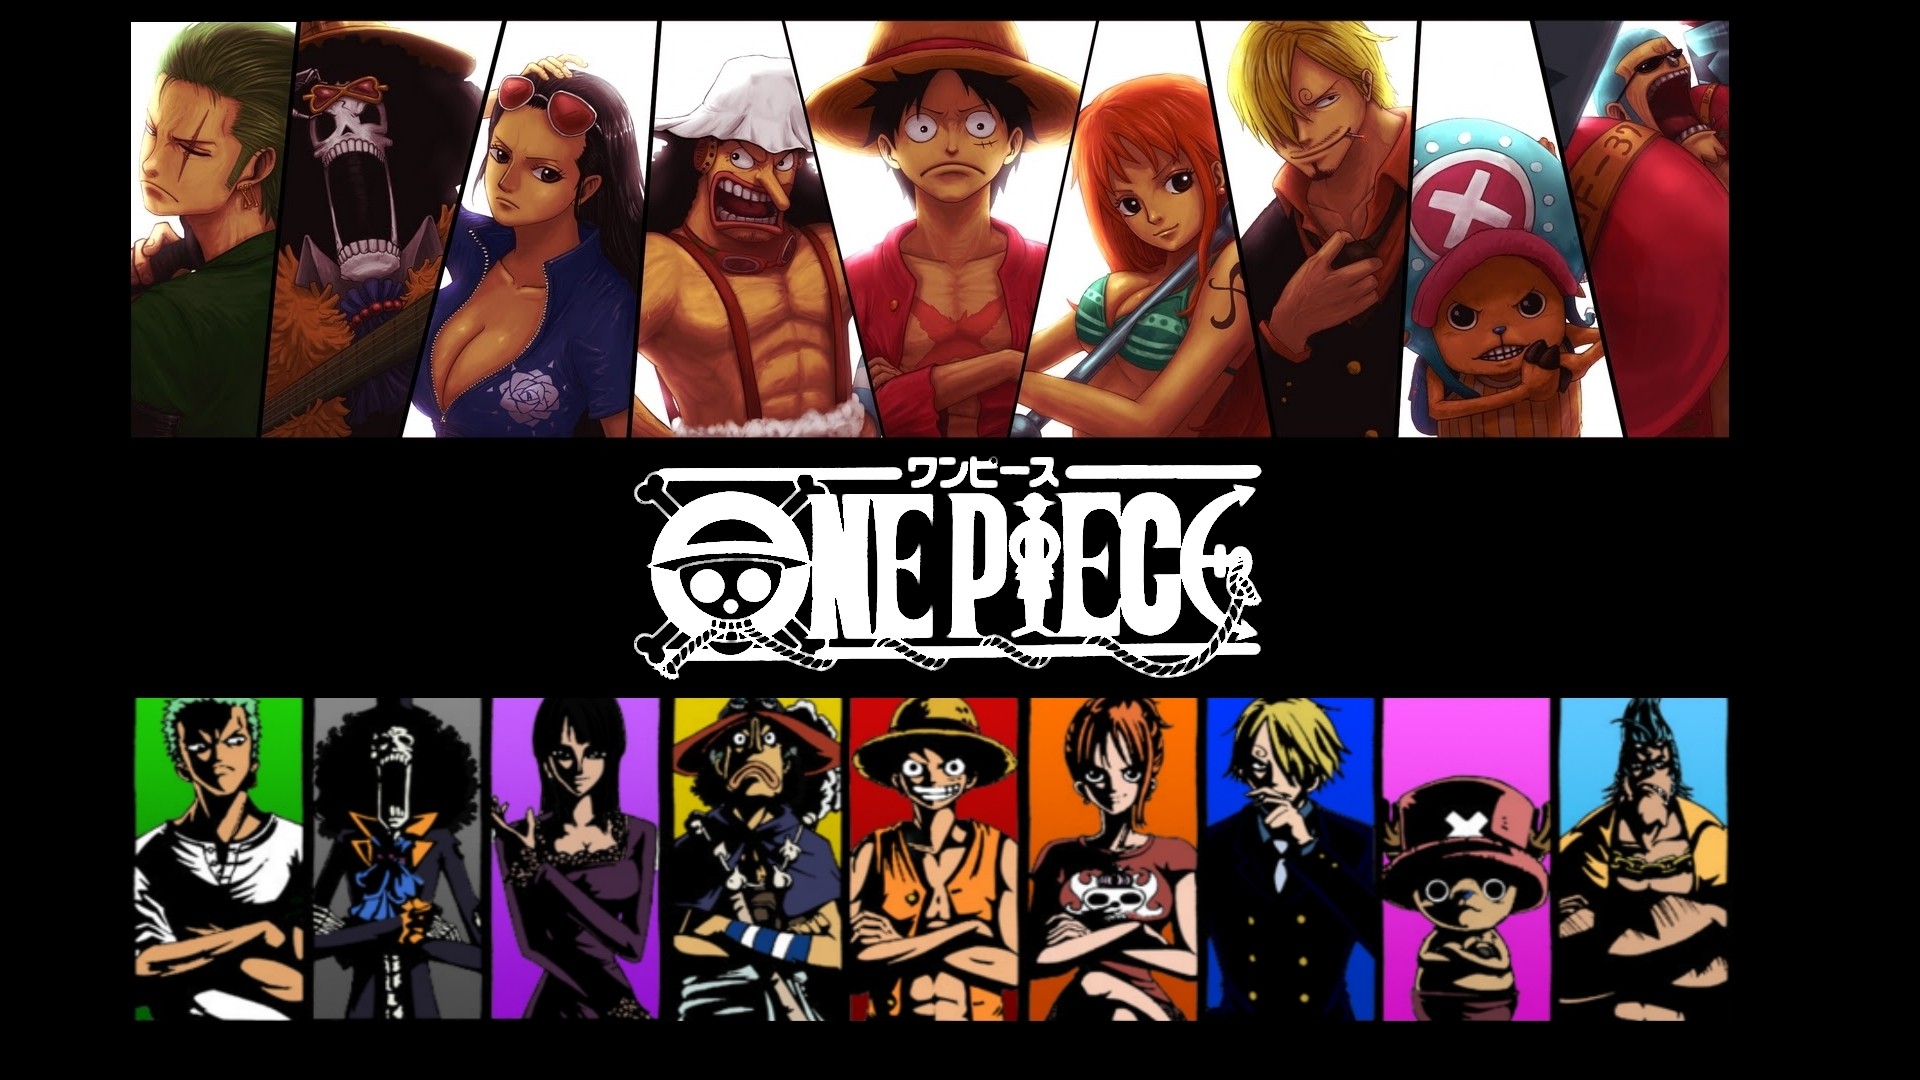 Free download Image One Piece Manga Wallpapers HD 1080pjpg ShadowLand  Online [1920x1080] for your Desktop, Mobile & Tablet | Explore 75+ One  Piece Hd Wallpapers | One Piece Wallpaper Hd, One Piece